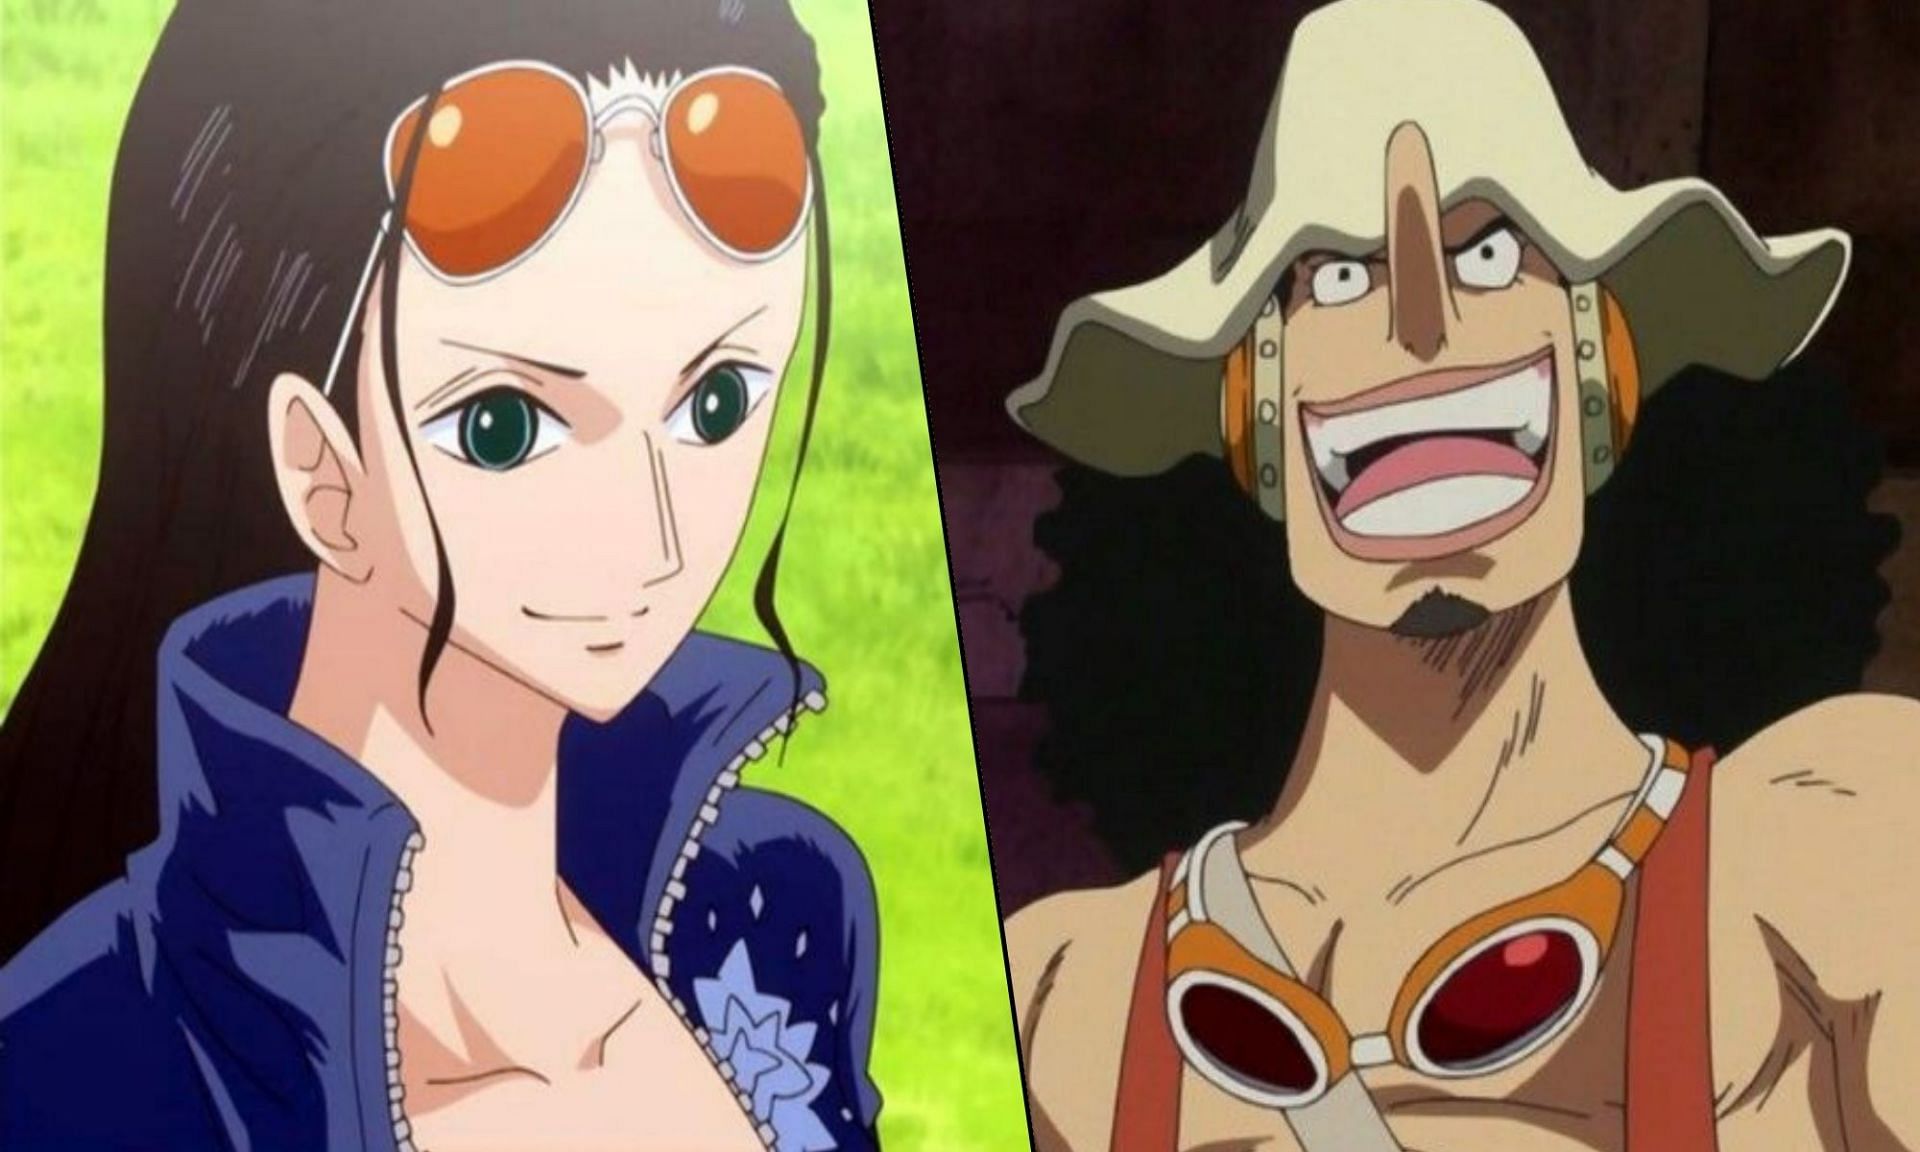 The Straw Hats have varying levels of Haki experience